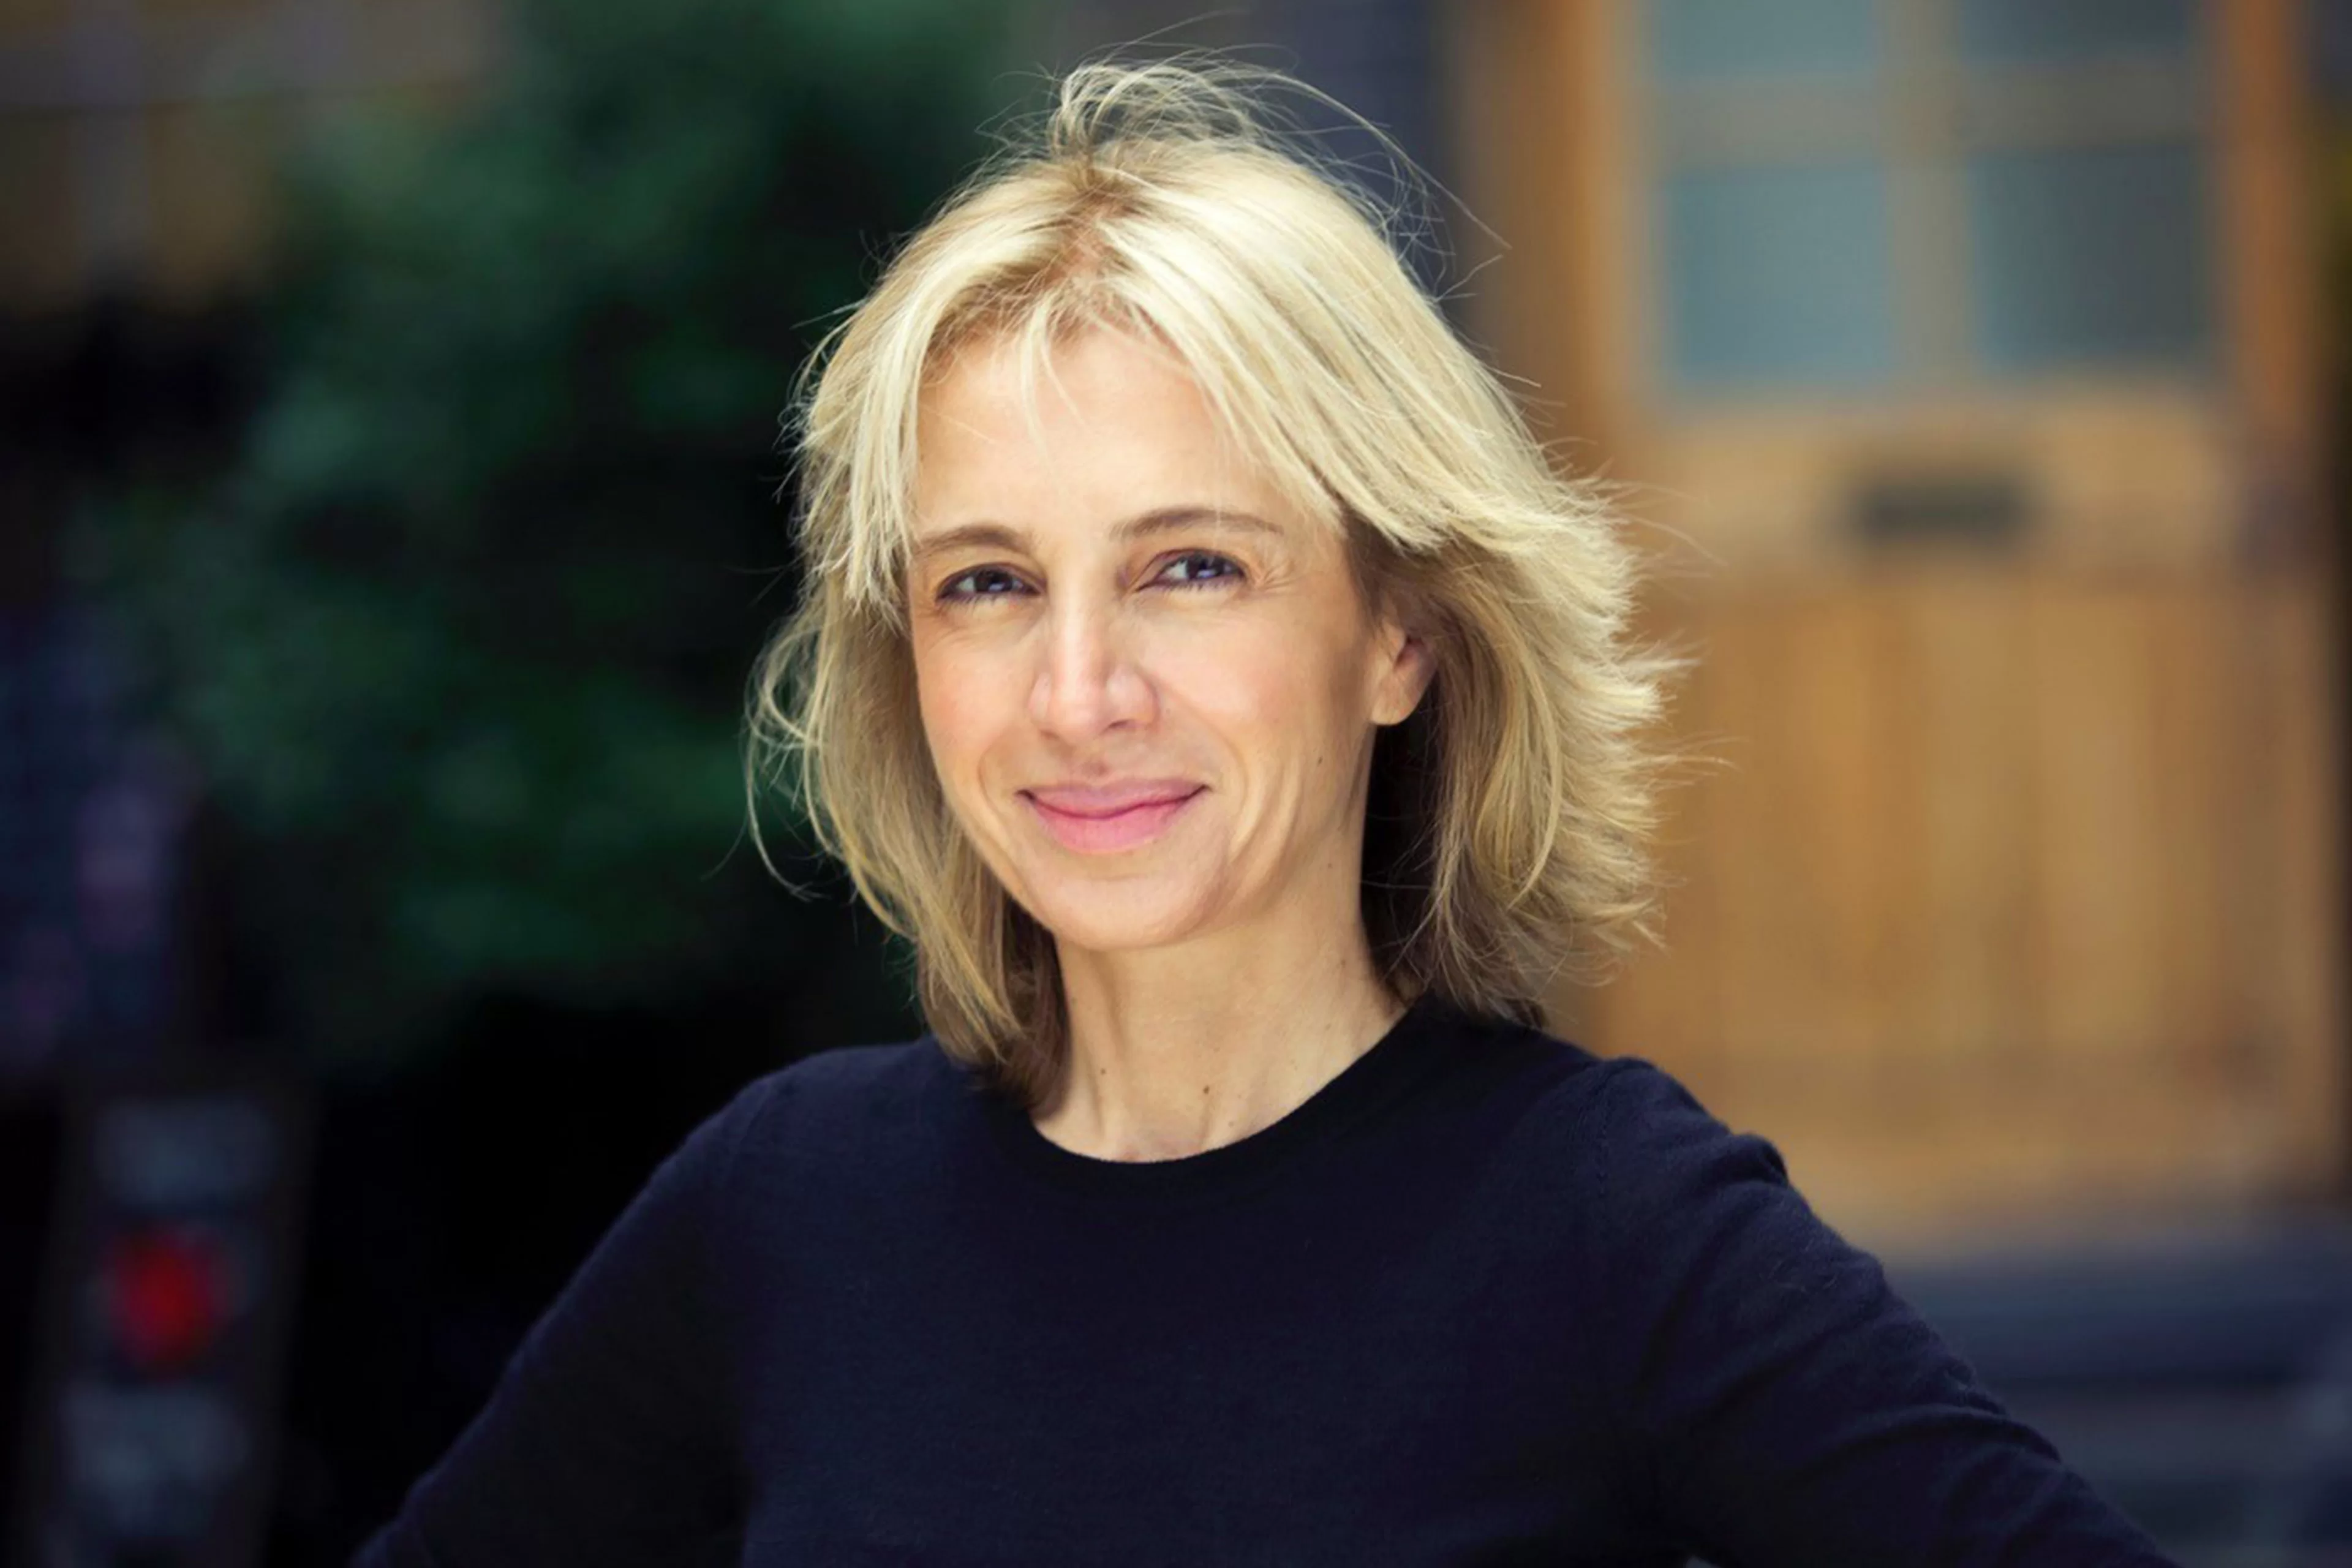 Sahar Hashemi OBE, founder of Coffee Republic smiling at the camera wearing a back top